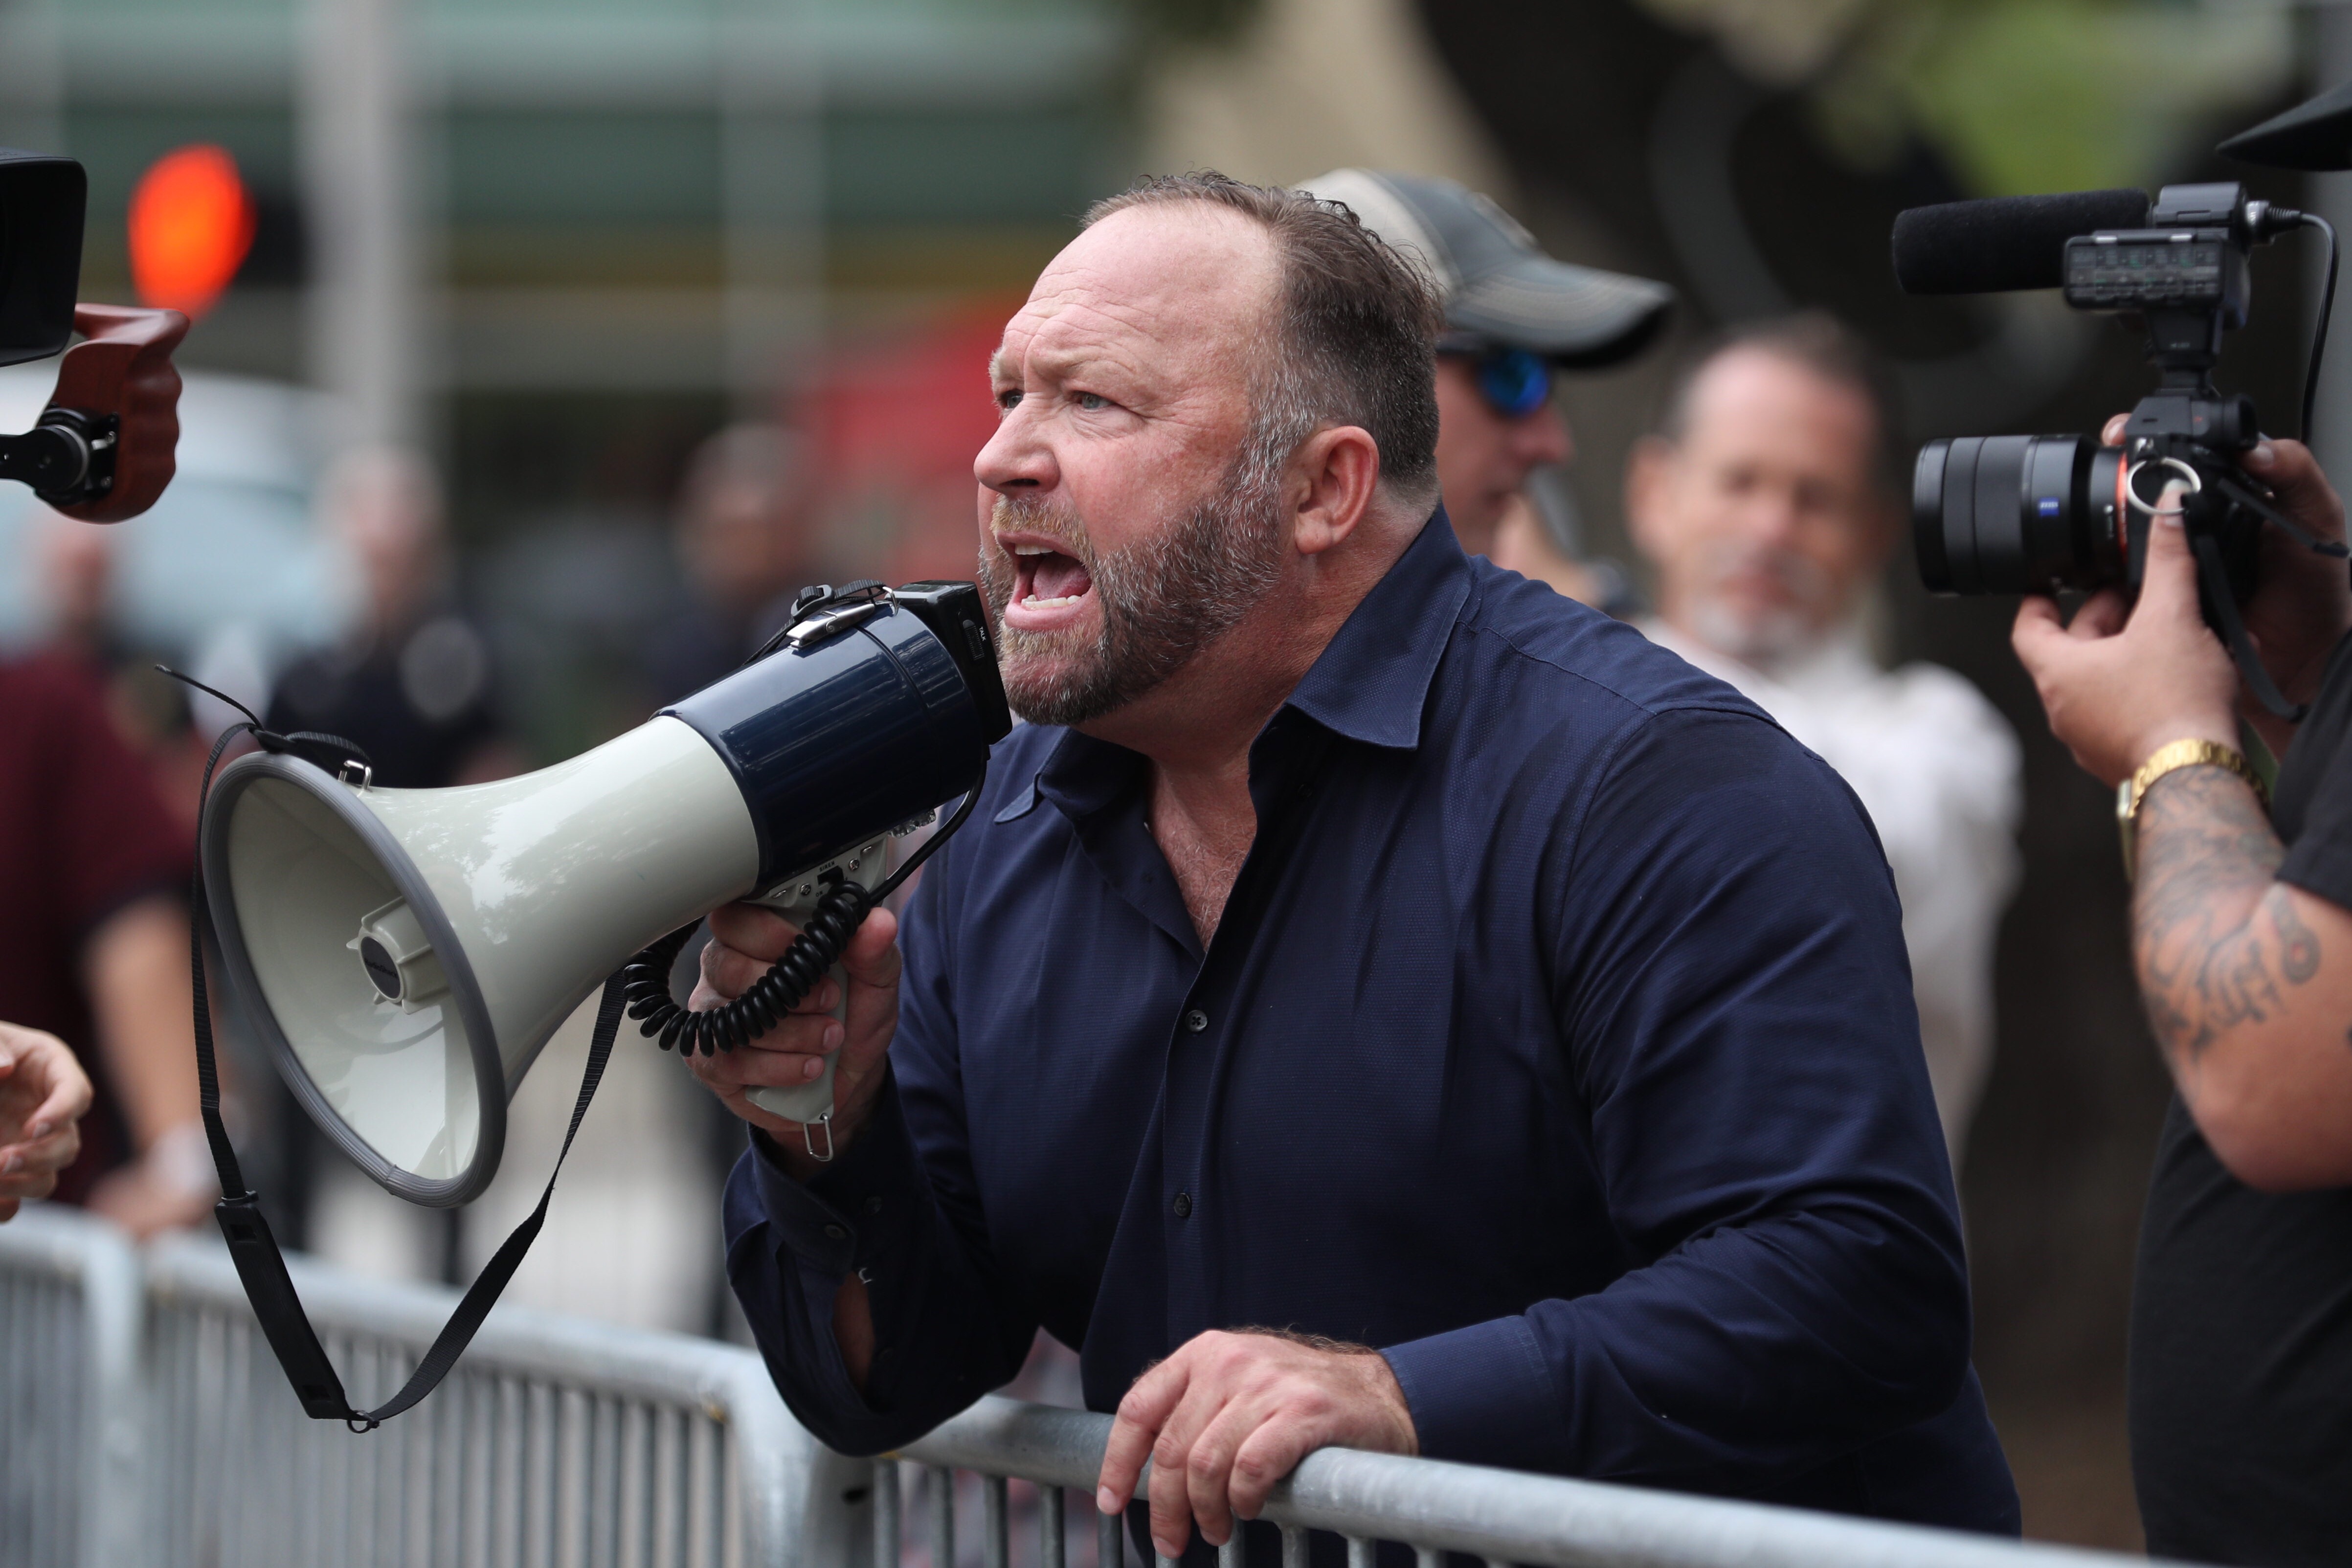 Alex Jones yells at protestors outside of Toyota Center before a Trump campaign rally on October 22, 2018, in Houston, Texas. | Sources: Getty Images